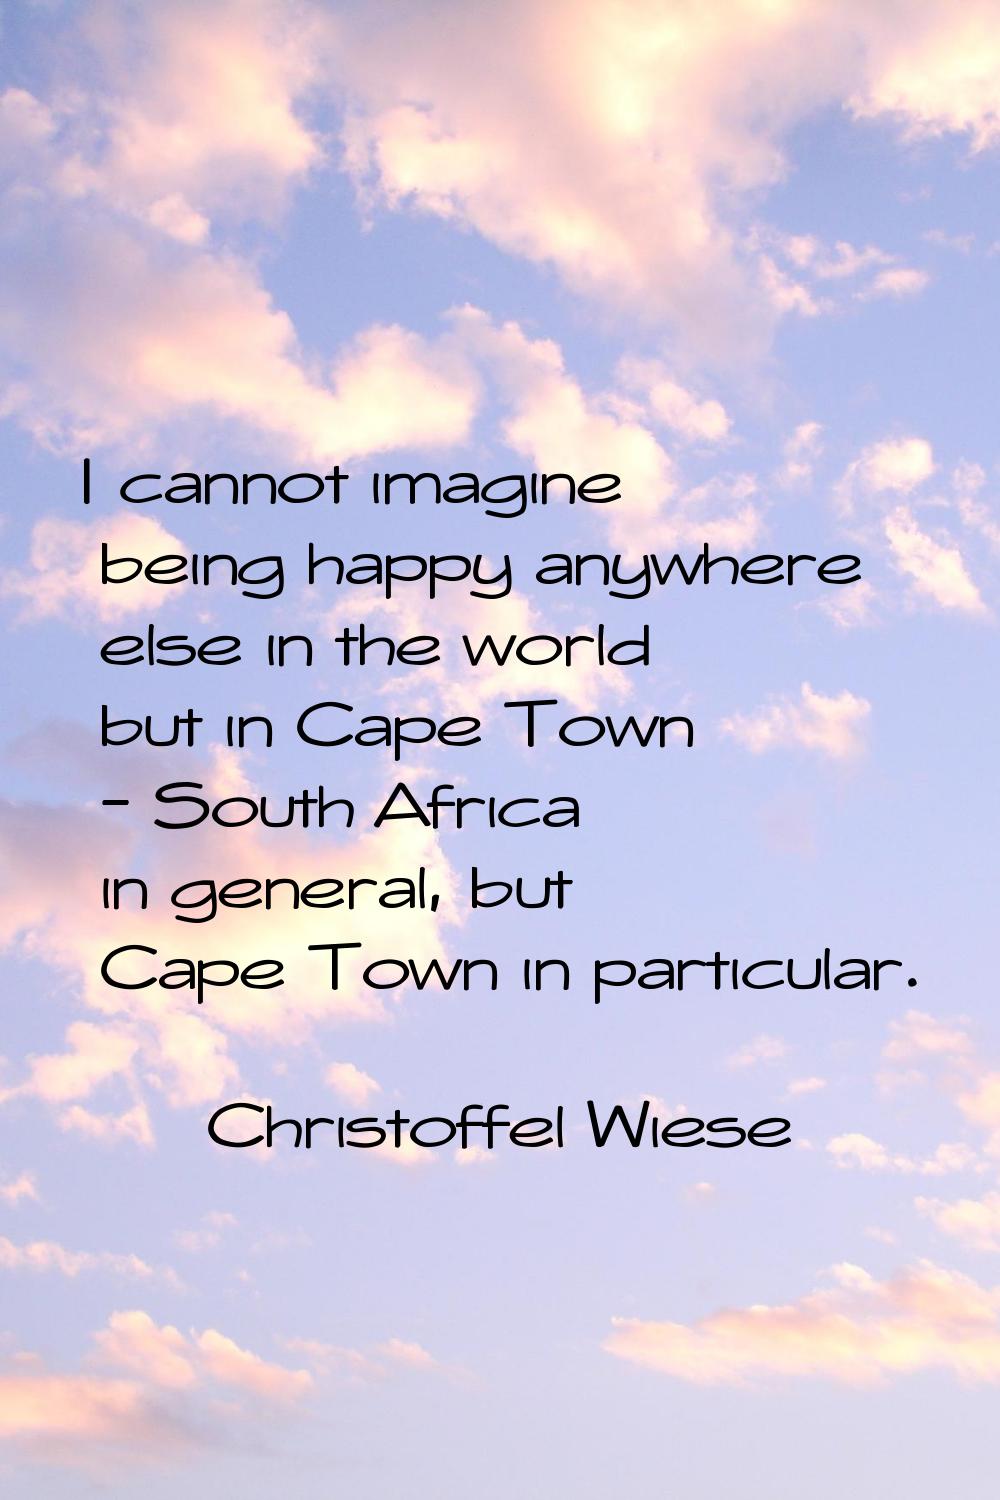 I cannot imagine being happy anywhere else in the world but in Cape Town - South Africa in general,